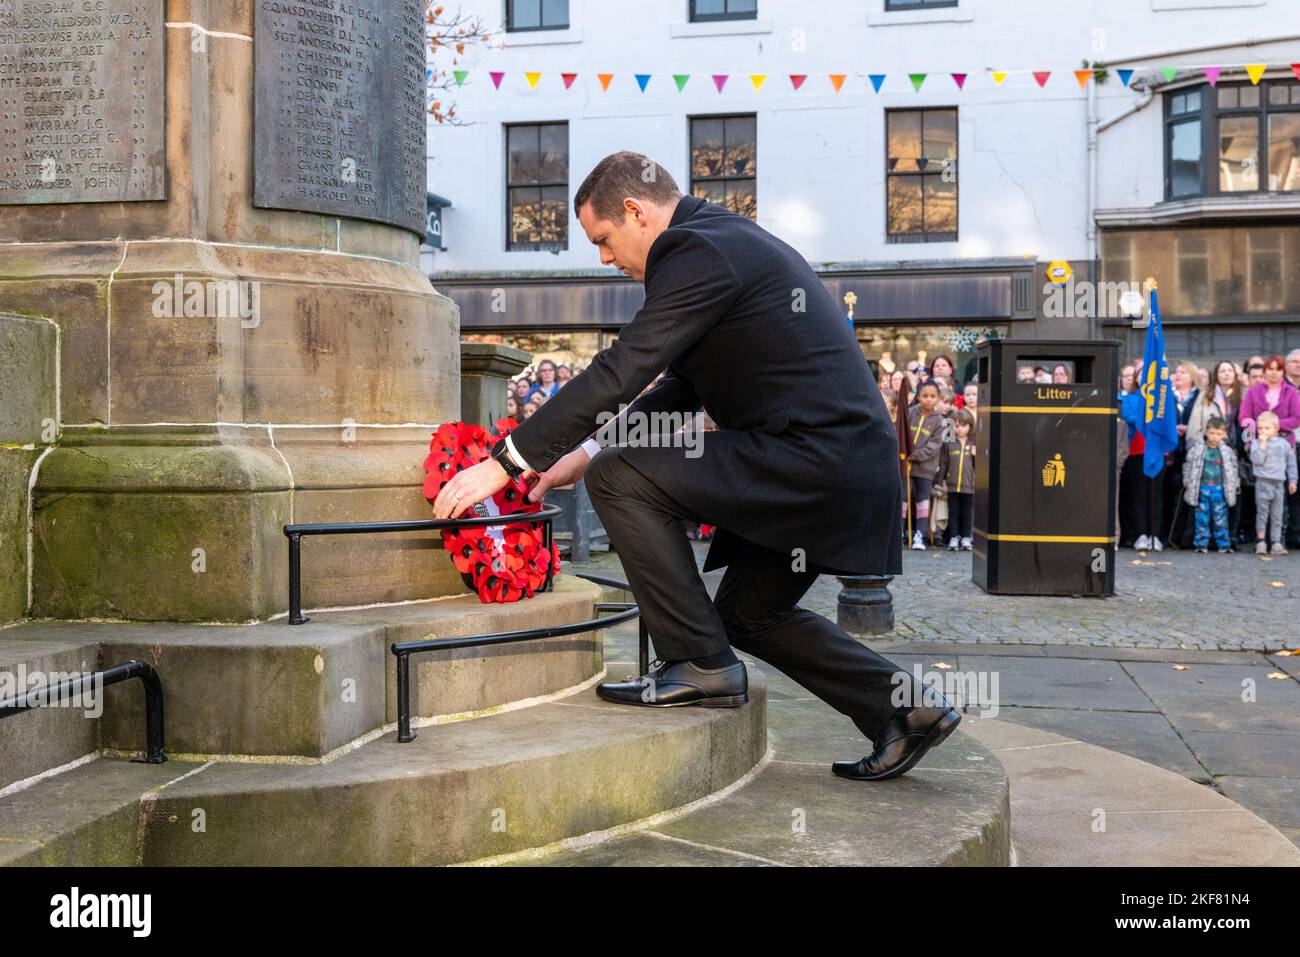 13 November 2022. Elgin,Moray,Scotland. This is from the Remembrance Parade and Wreath Laying at the War Memorial on Elgin High Street. Stock Photo